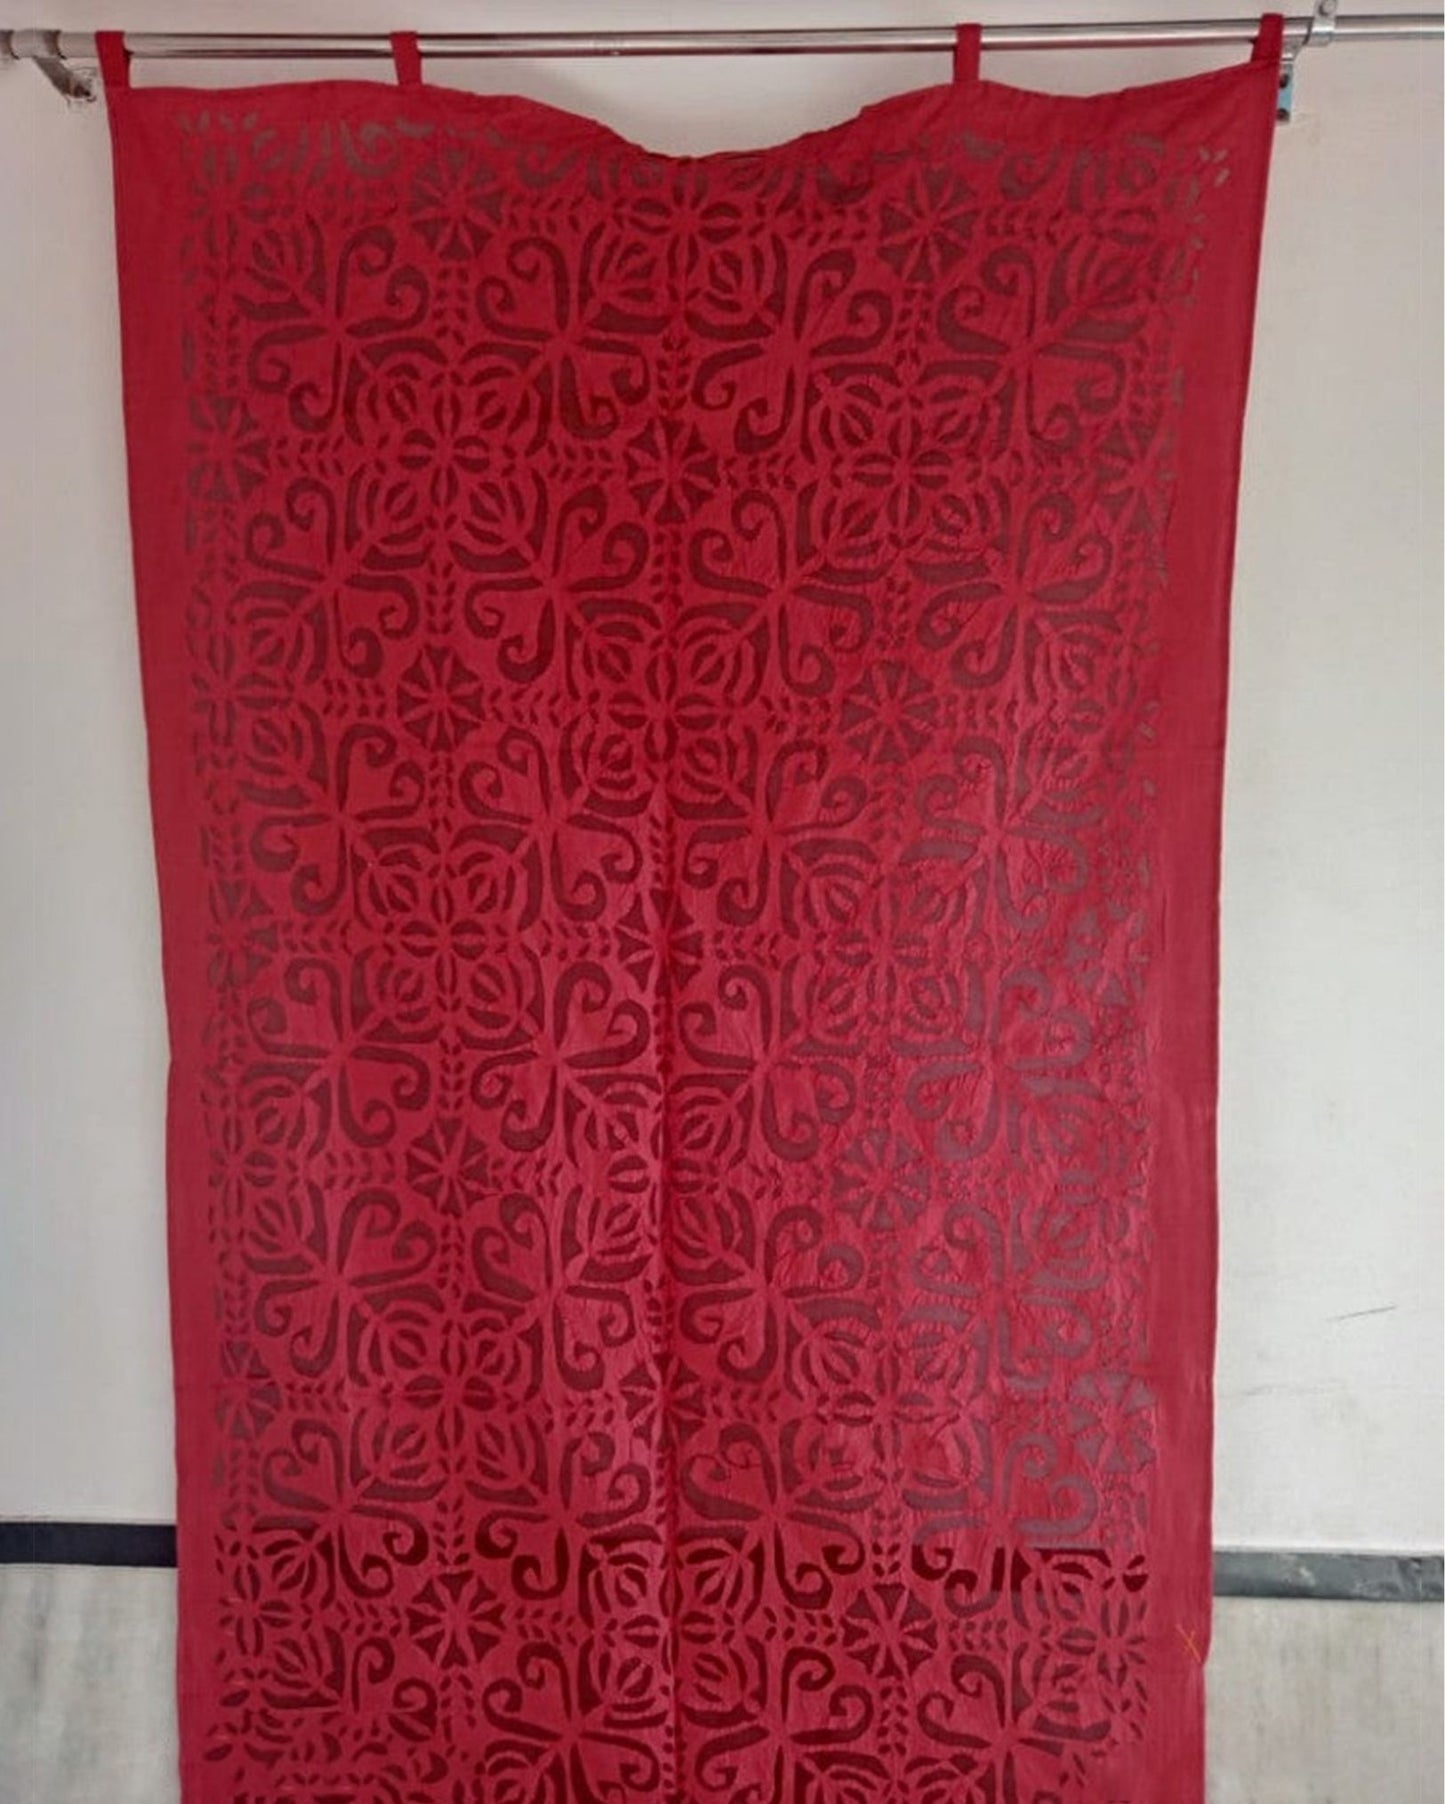 9512-Applique Work Wall Hanging Red Curtain
Size - 45"X100"